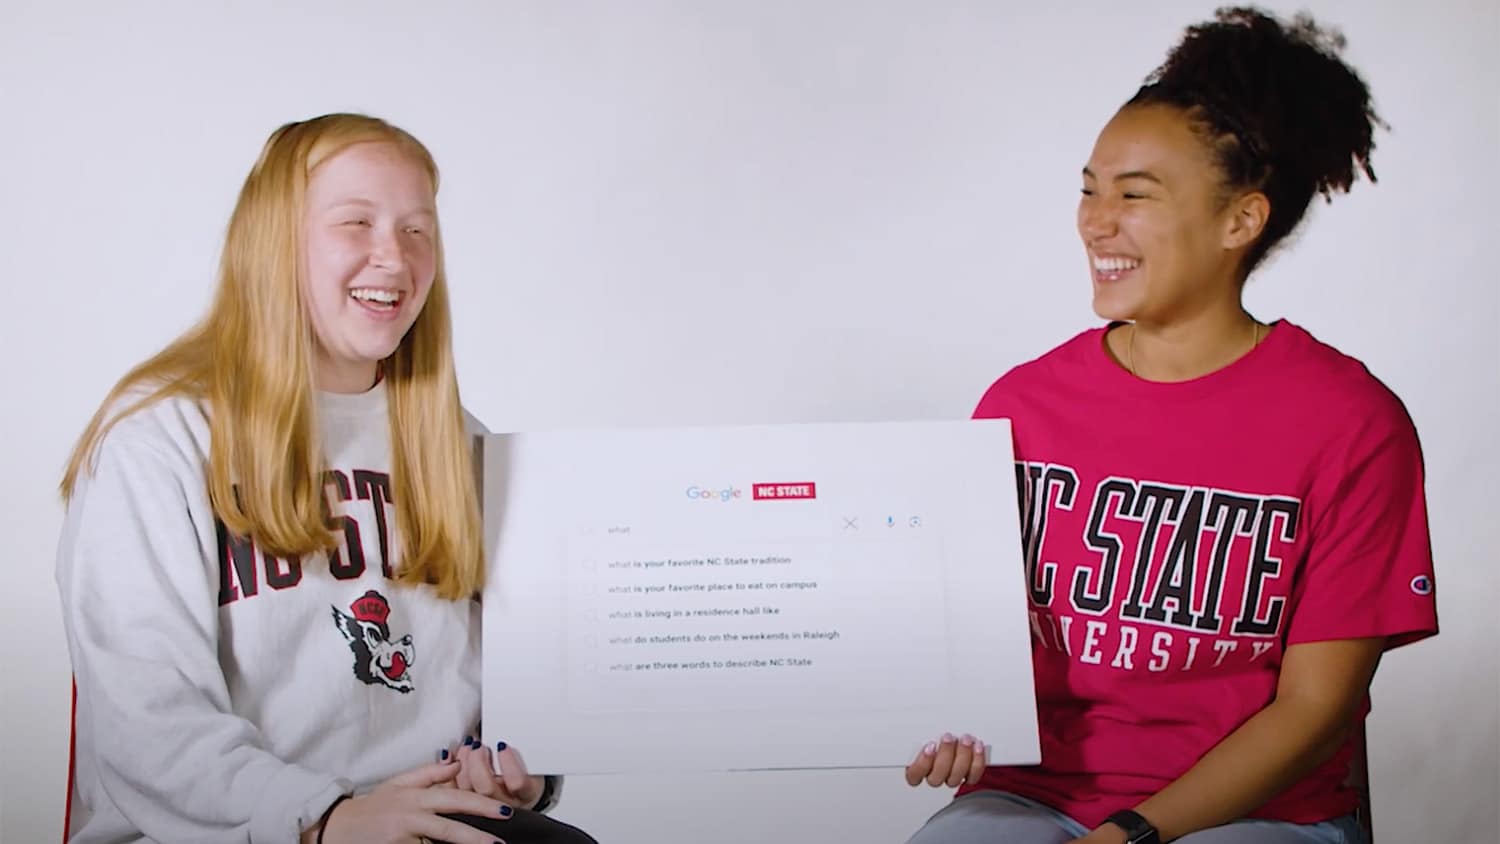 Four NC State University upperclassmen answer some of the most-asked questions about the university.